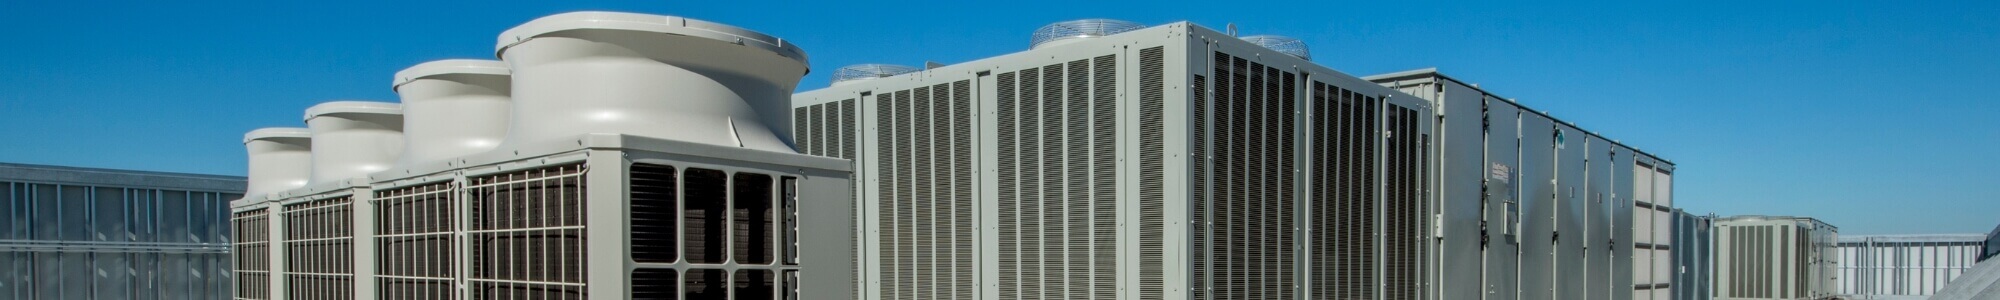 HVAC services in Caledon